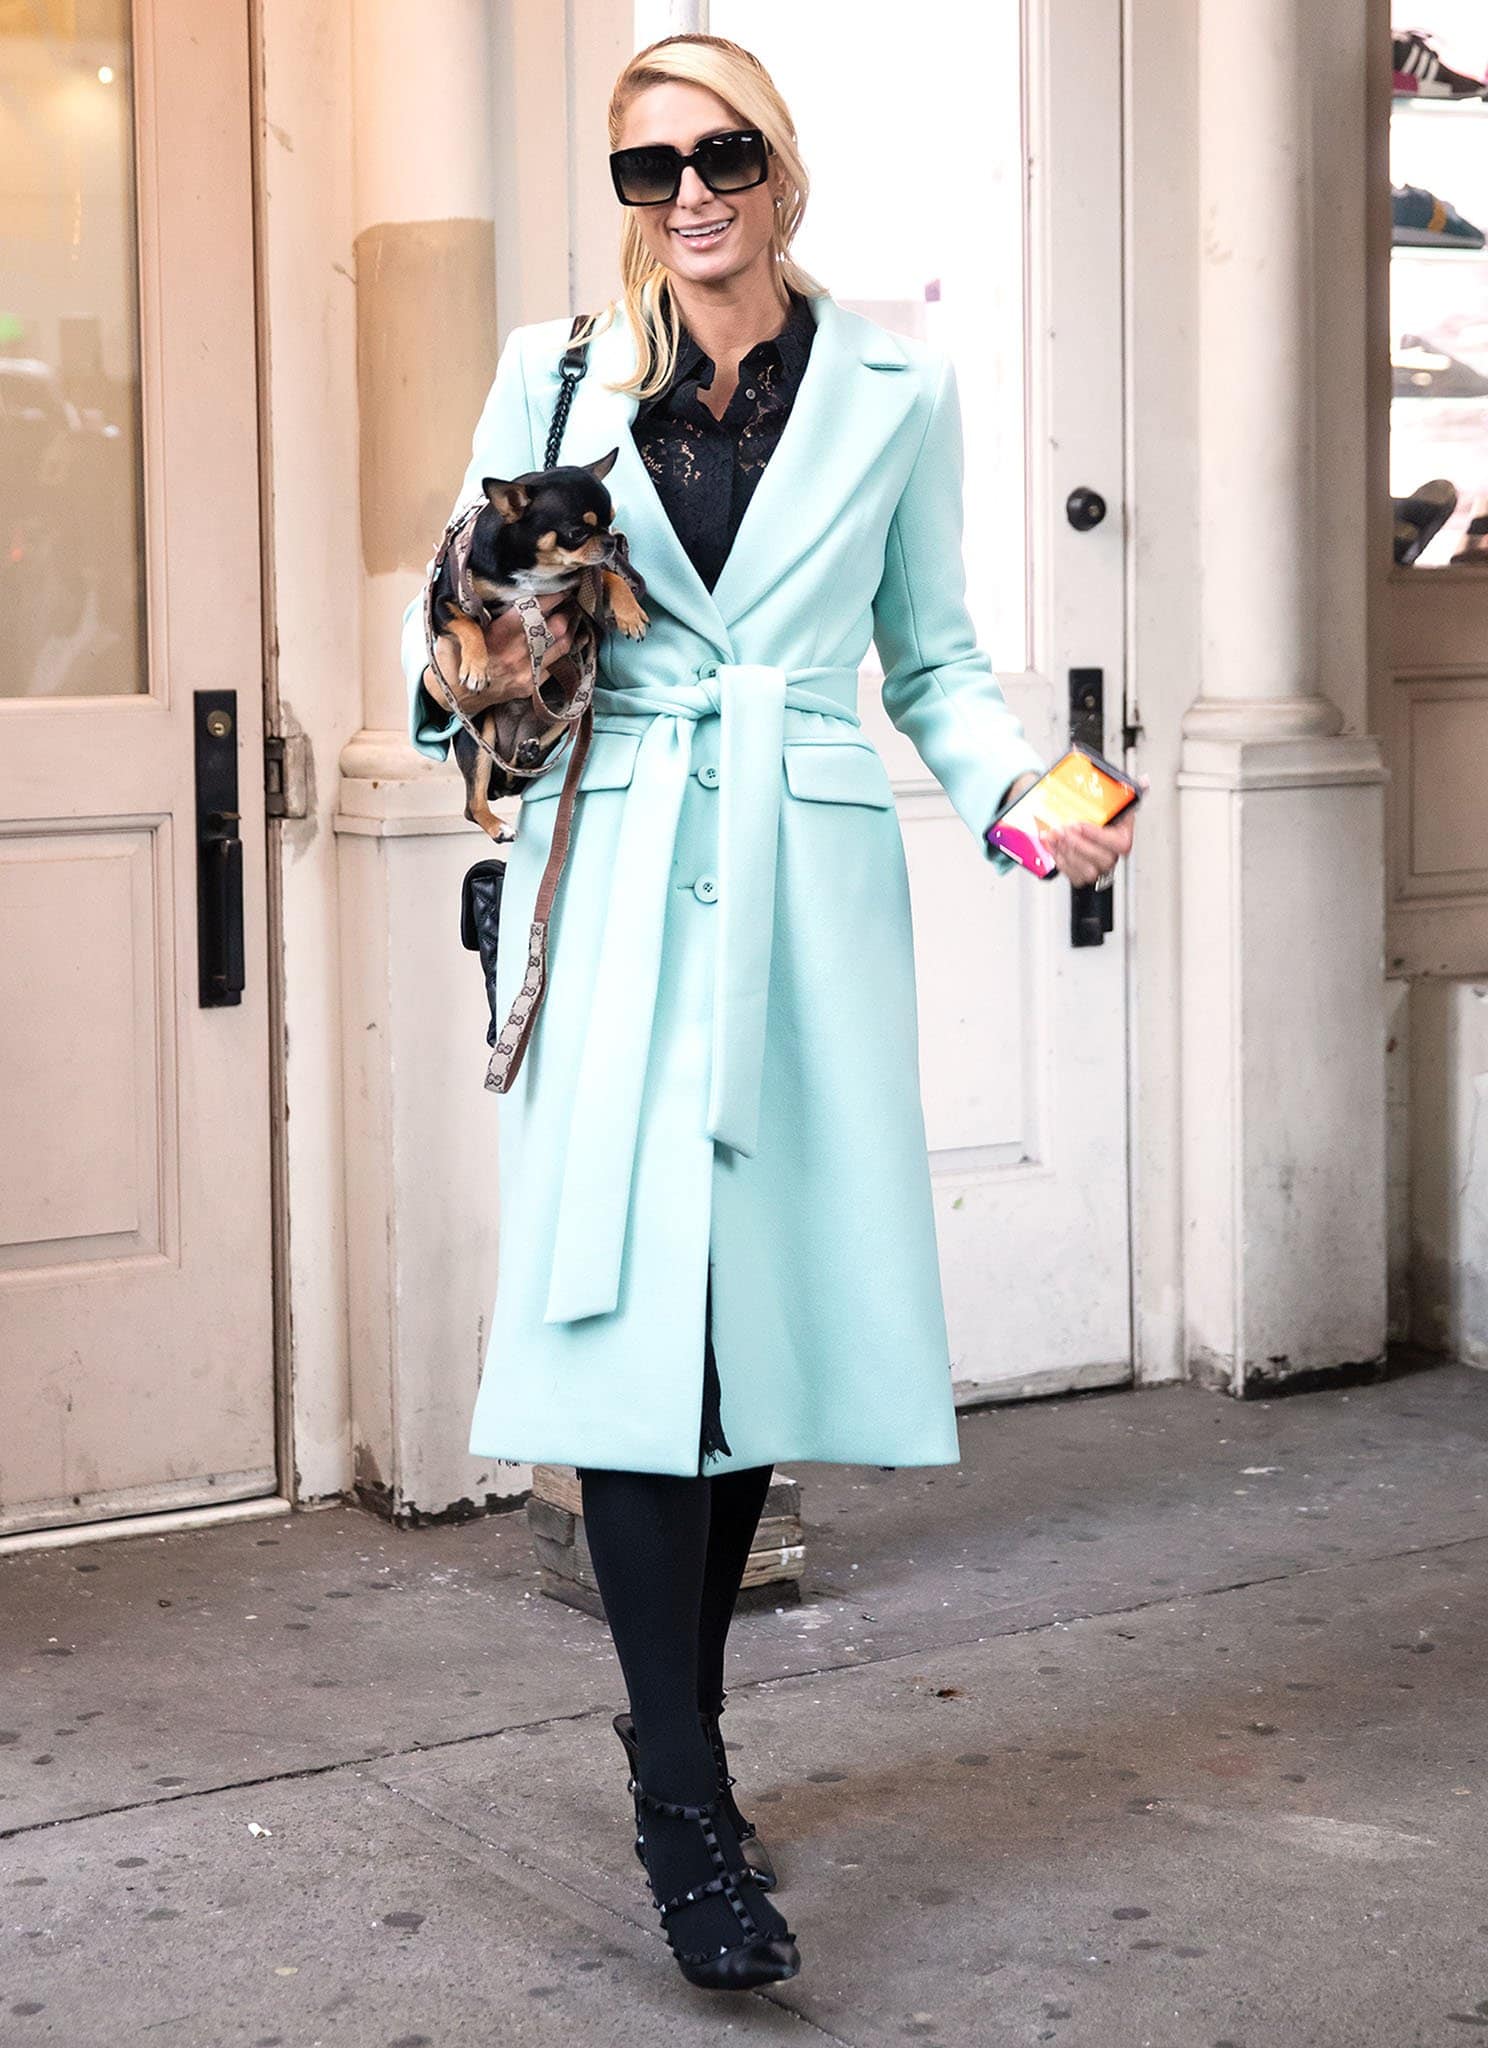 Paris Hilton wearing a chic teal coat with a black lace blouse and tights